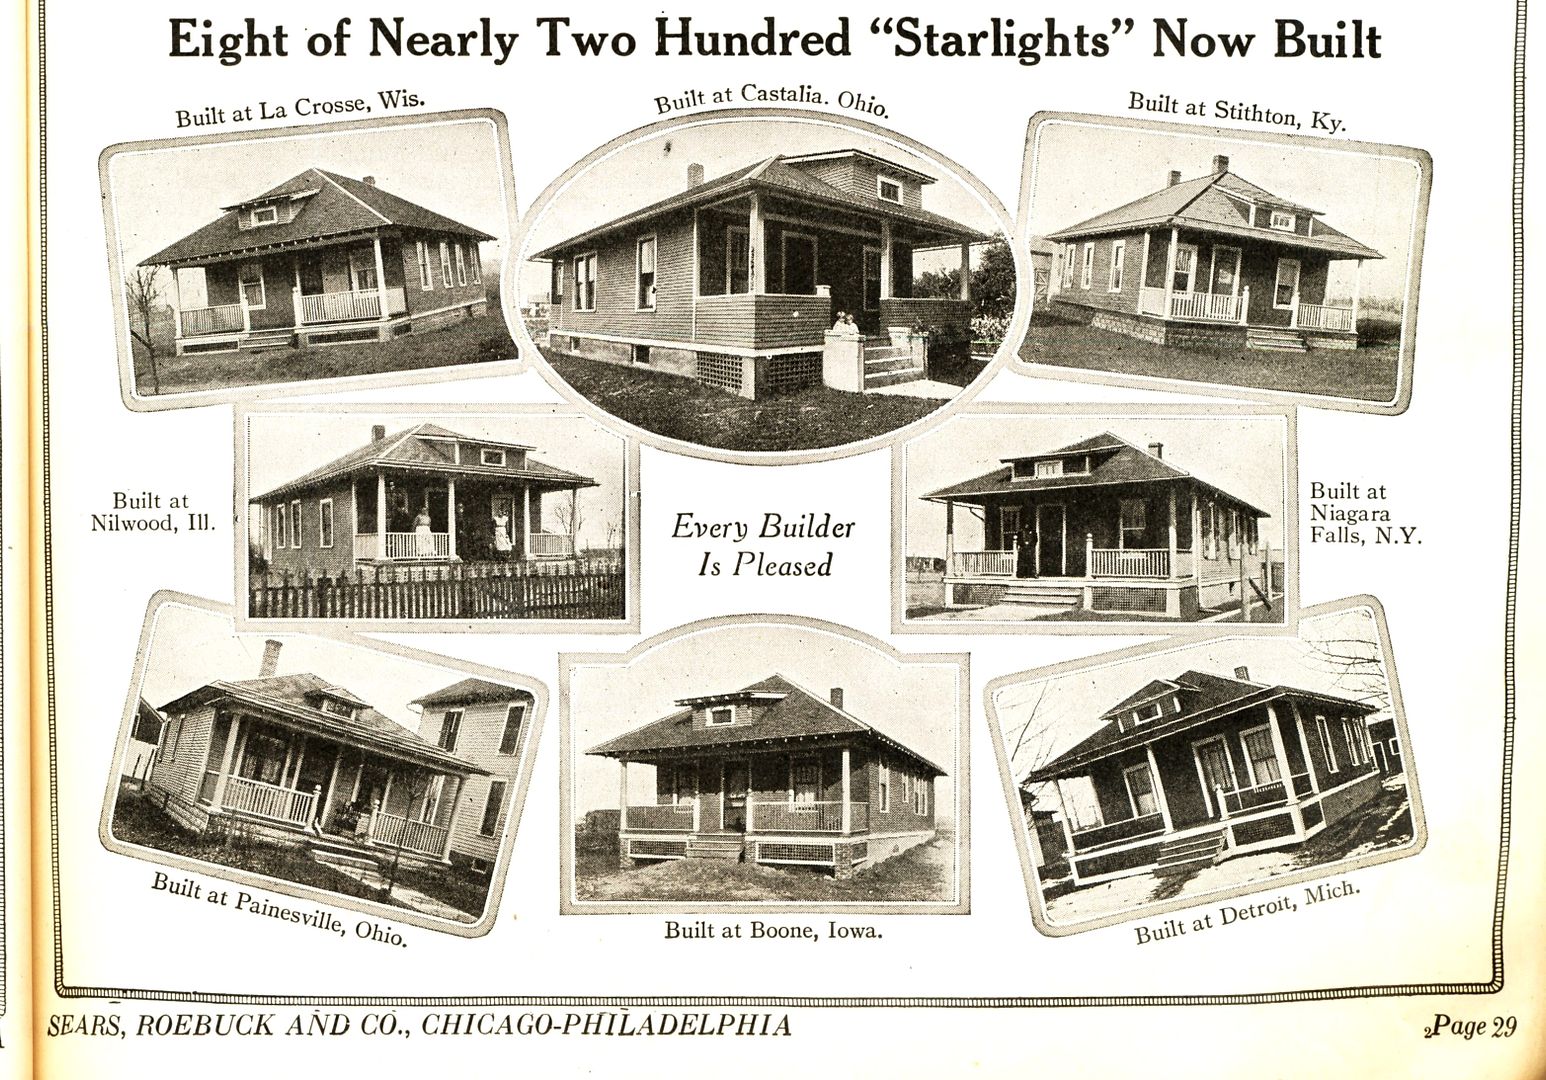 In the 1919 catalog, 